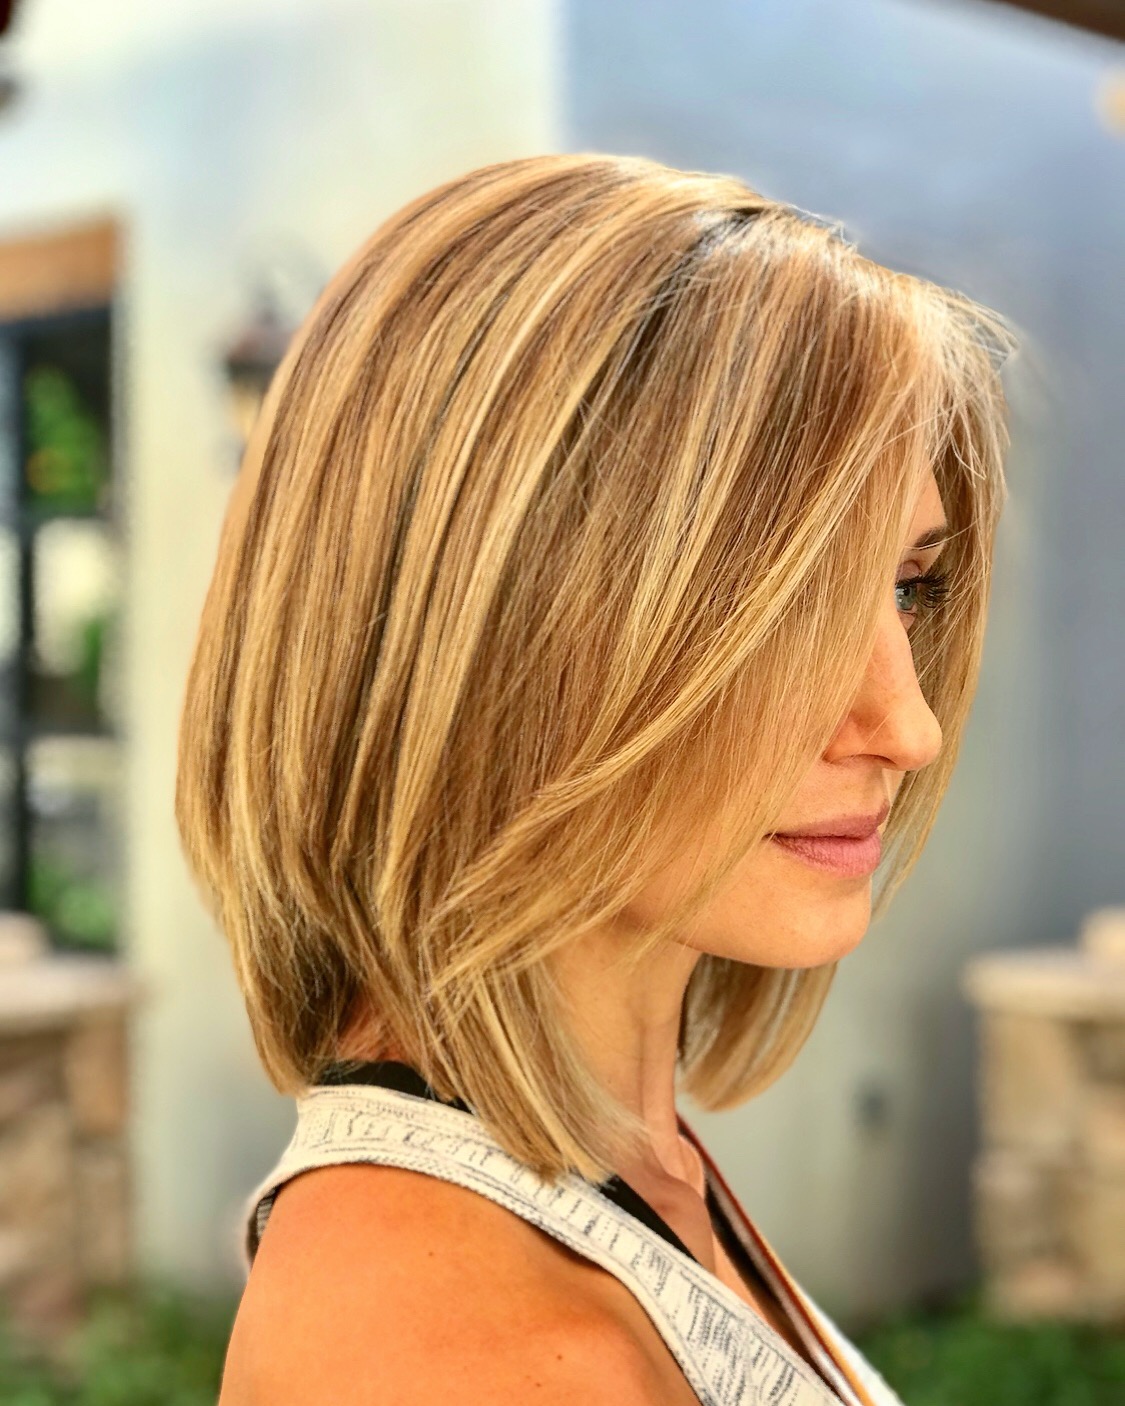 7 Stunning Haircuts for Women with Rapunzel-Like Tresses